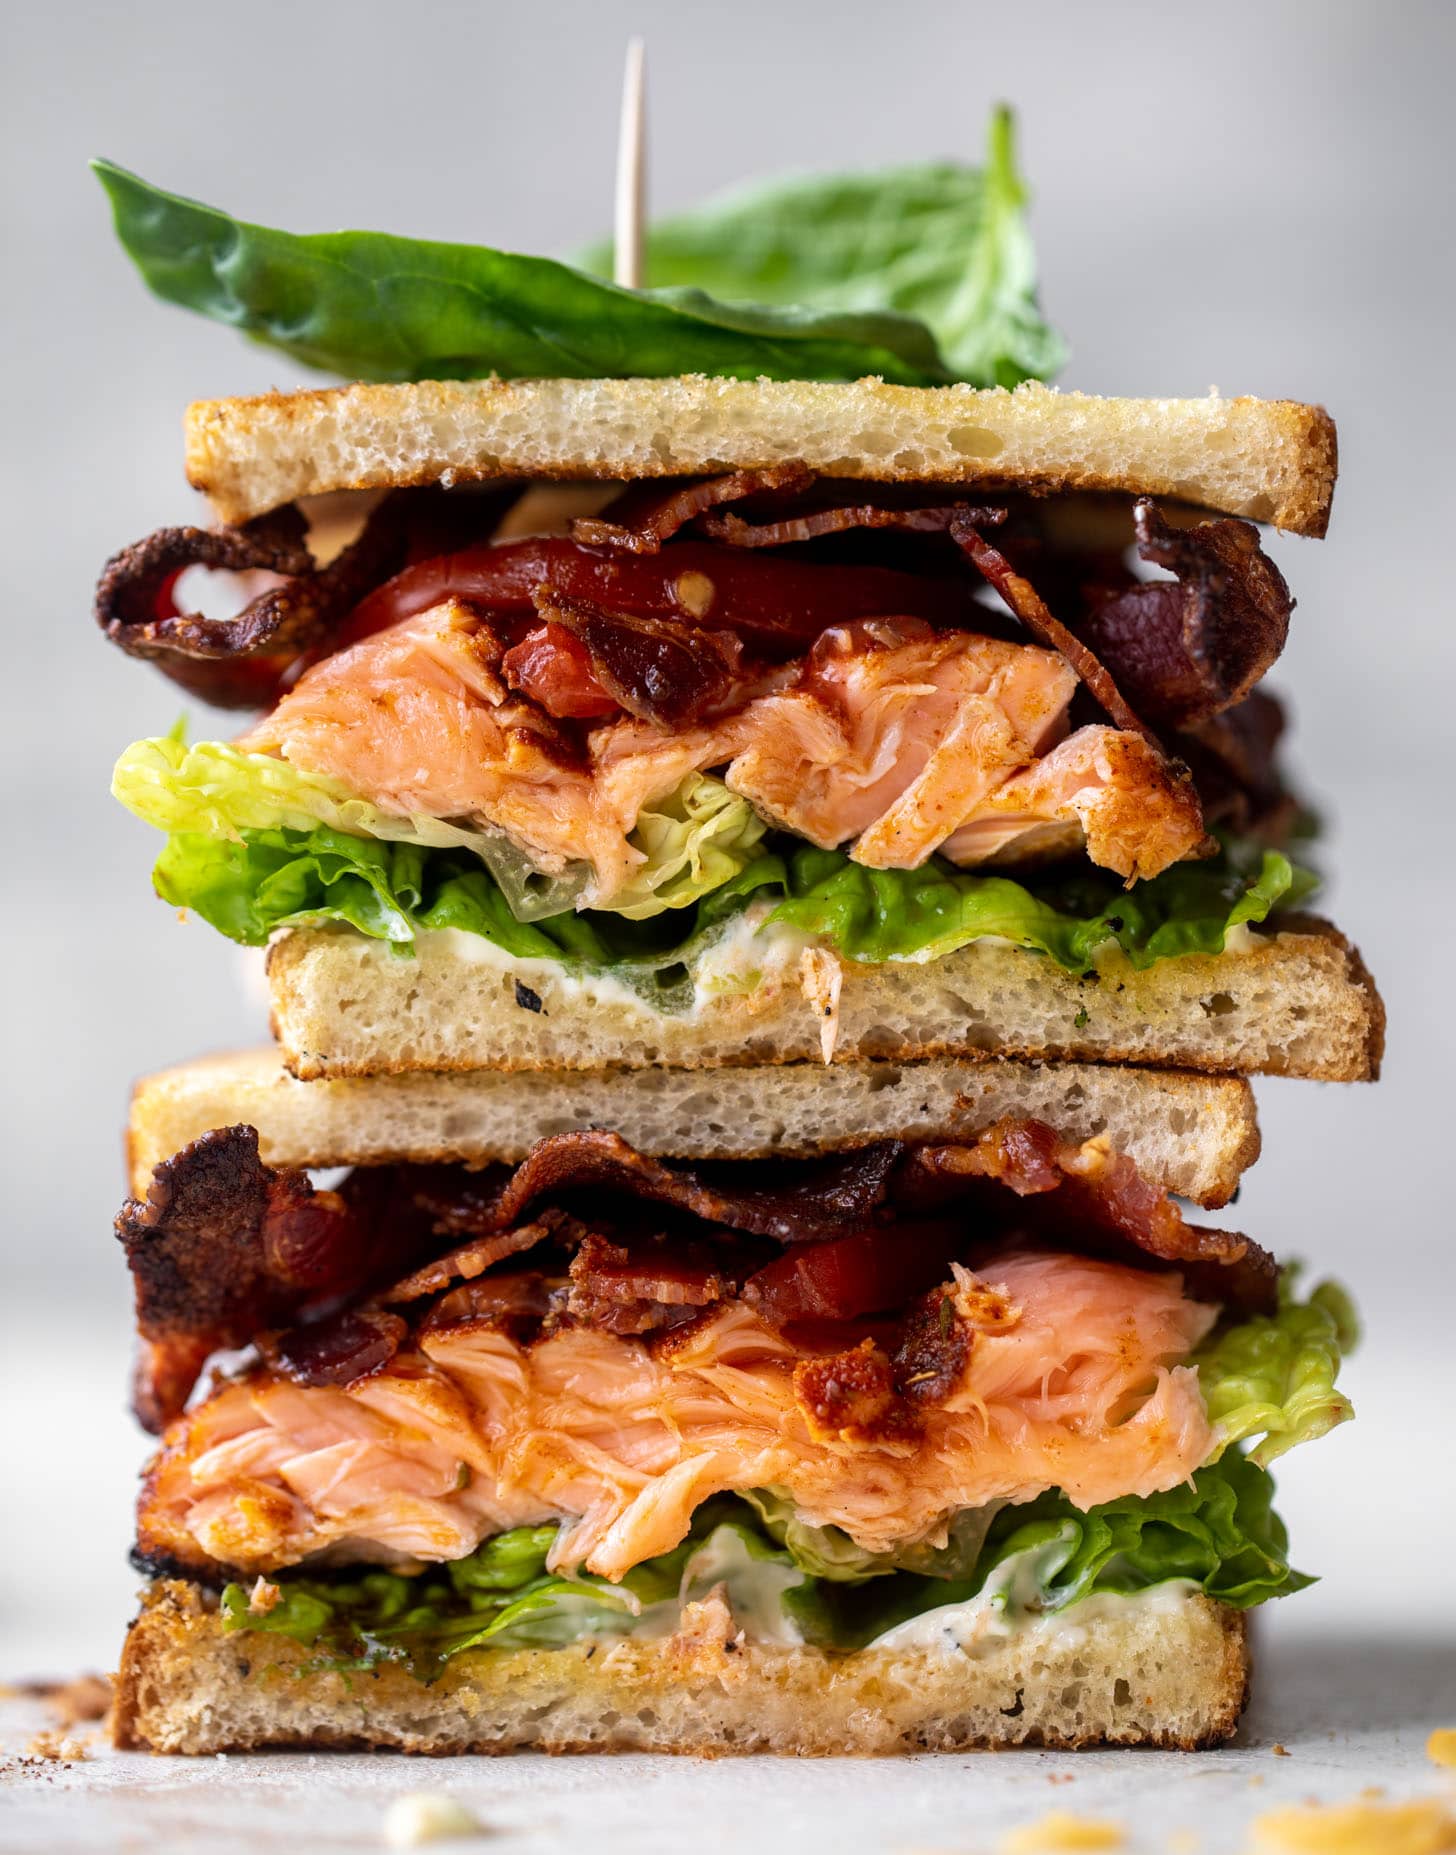 Delicious Sandwich Recipes: Grilled Salmon Club Sandwich with Charred Scallion Mayo